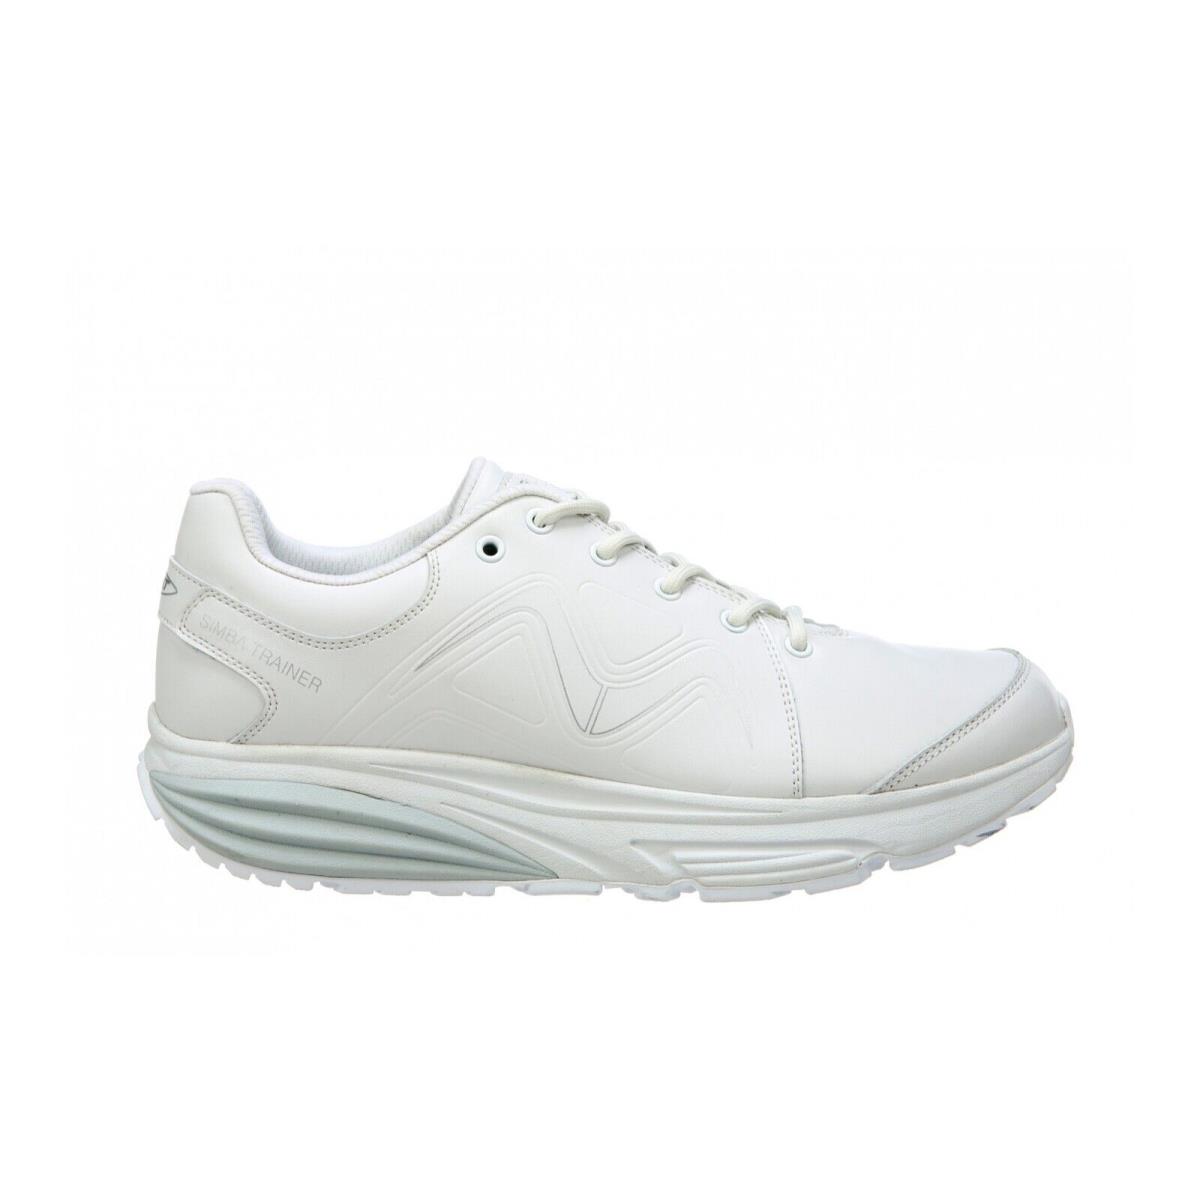 MBT shoes SIMBA TRAINER - White 0